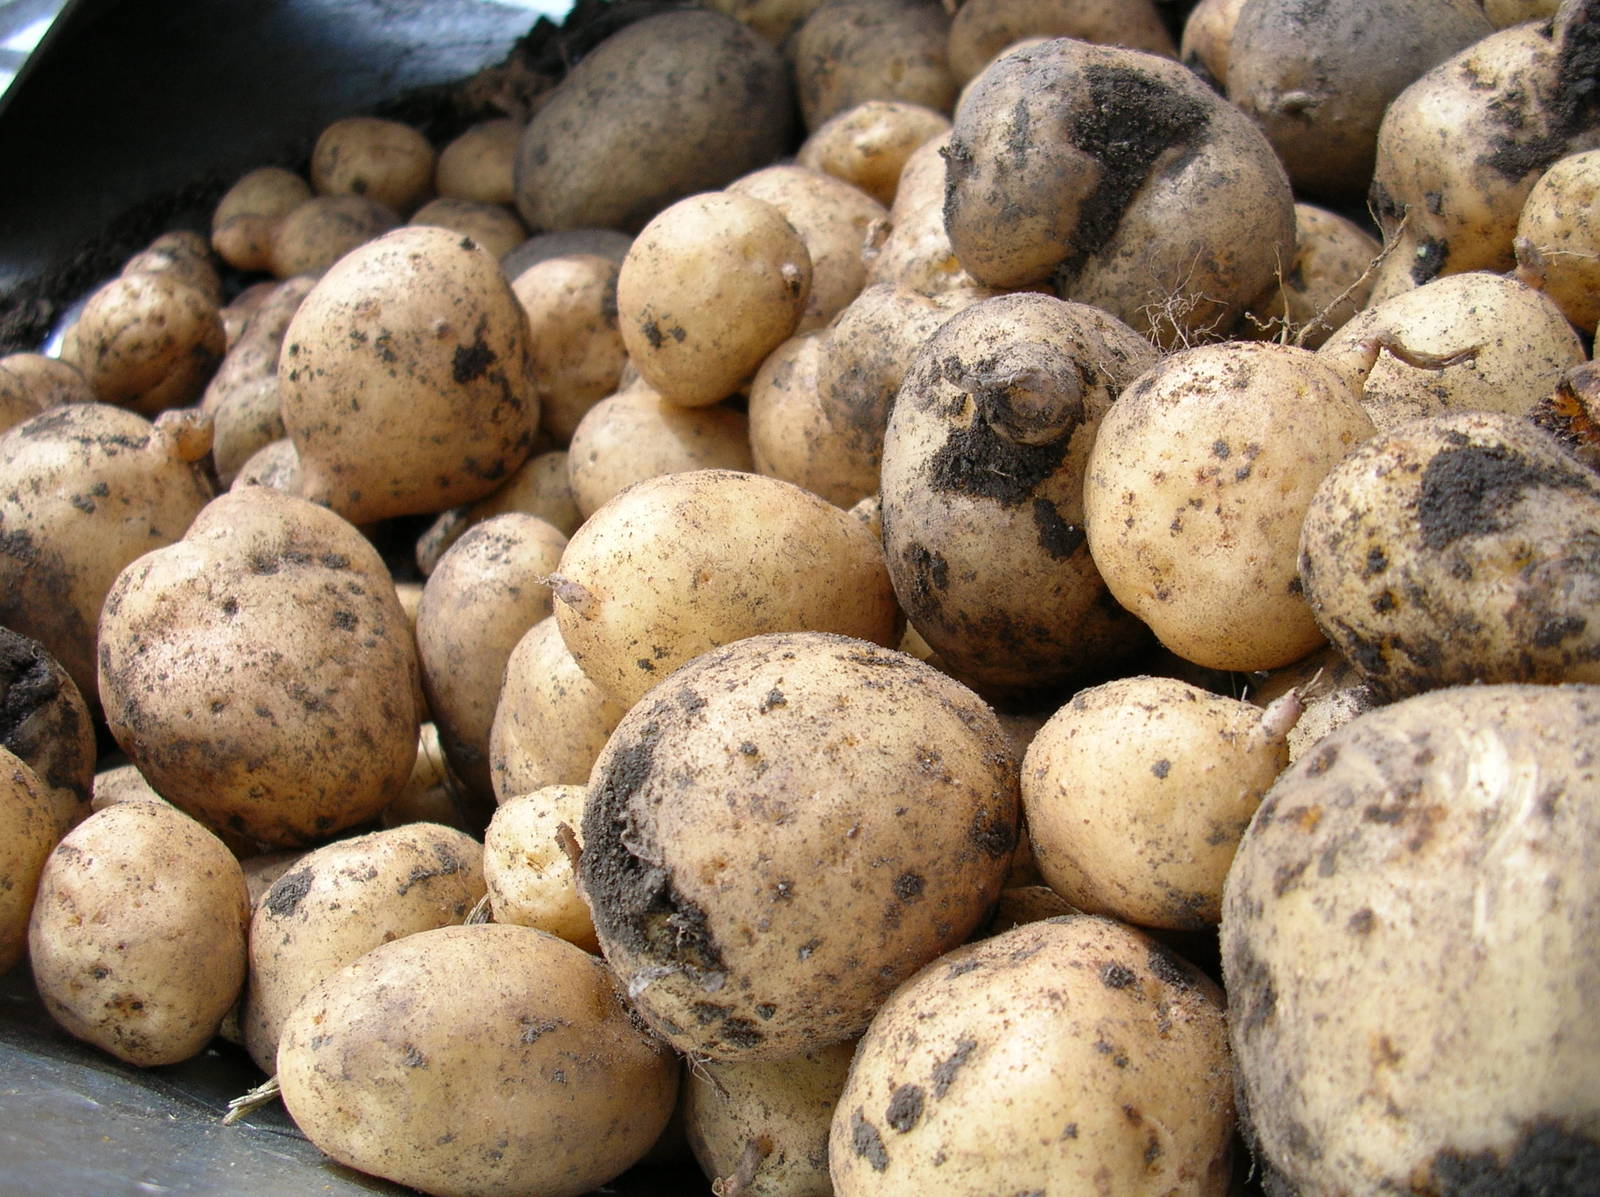 the potatoes are still with the brown and black dirt